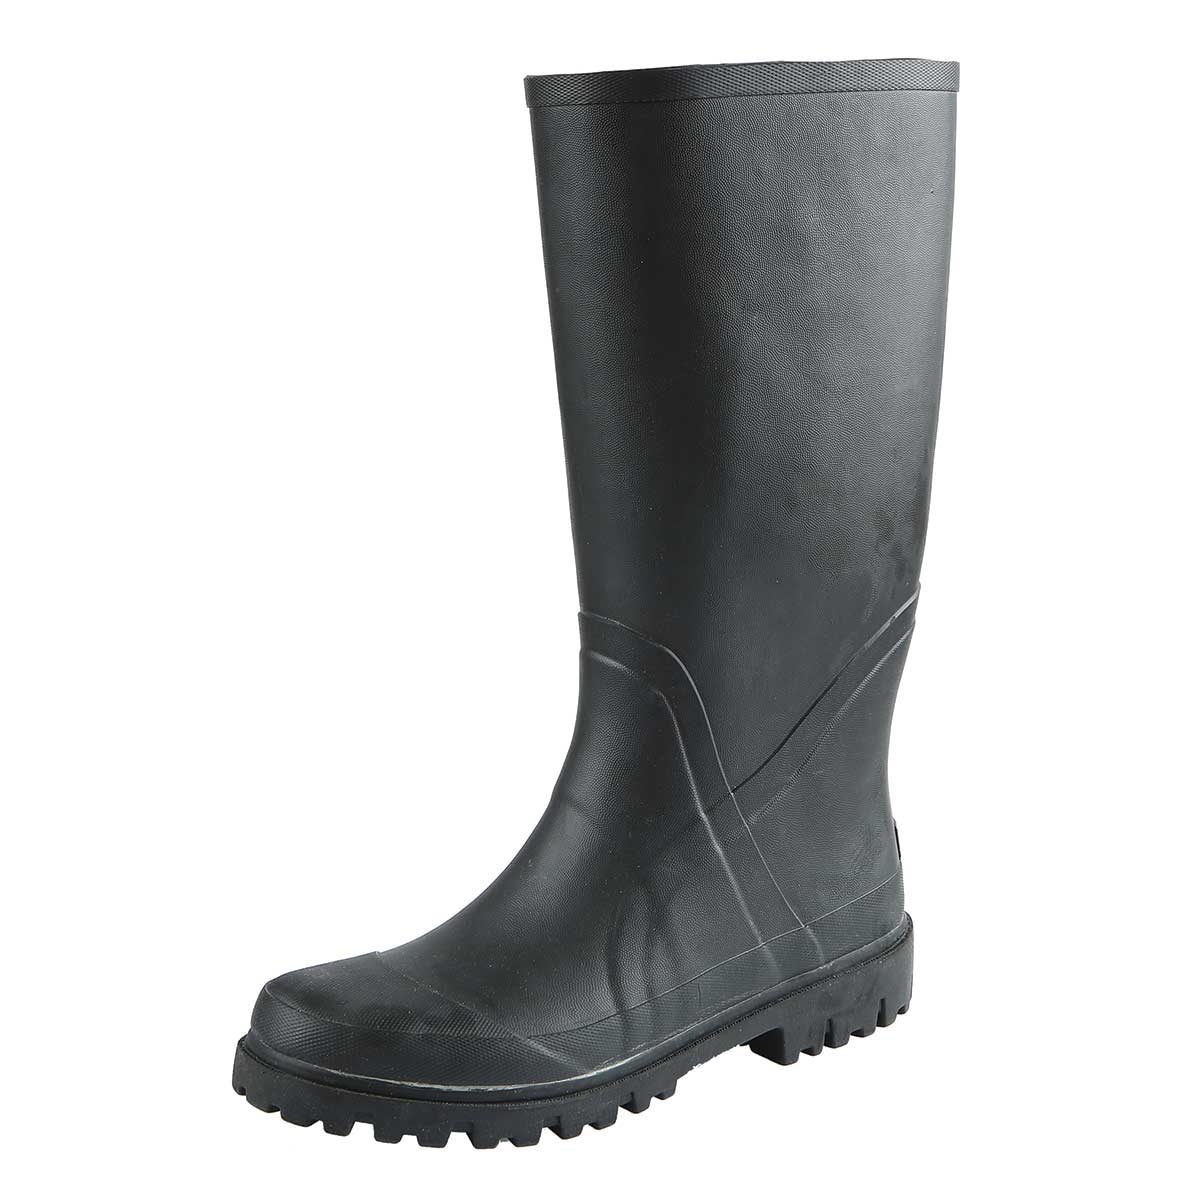 Northside 15" Textured Rubber Boot